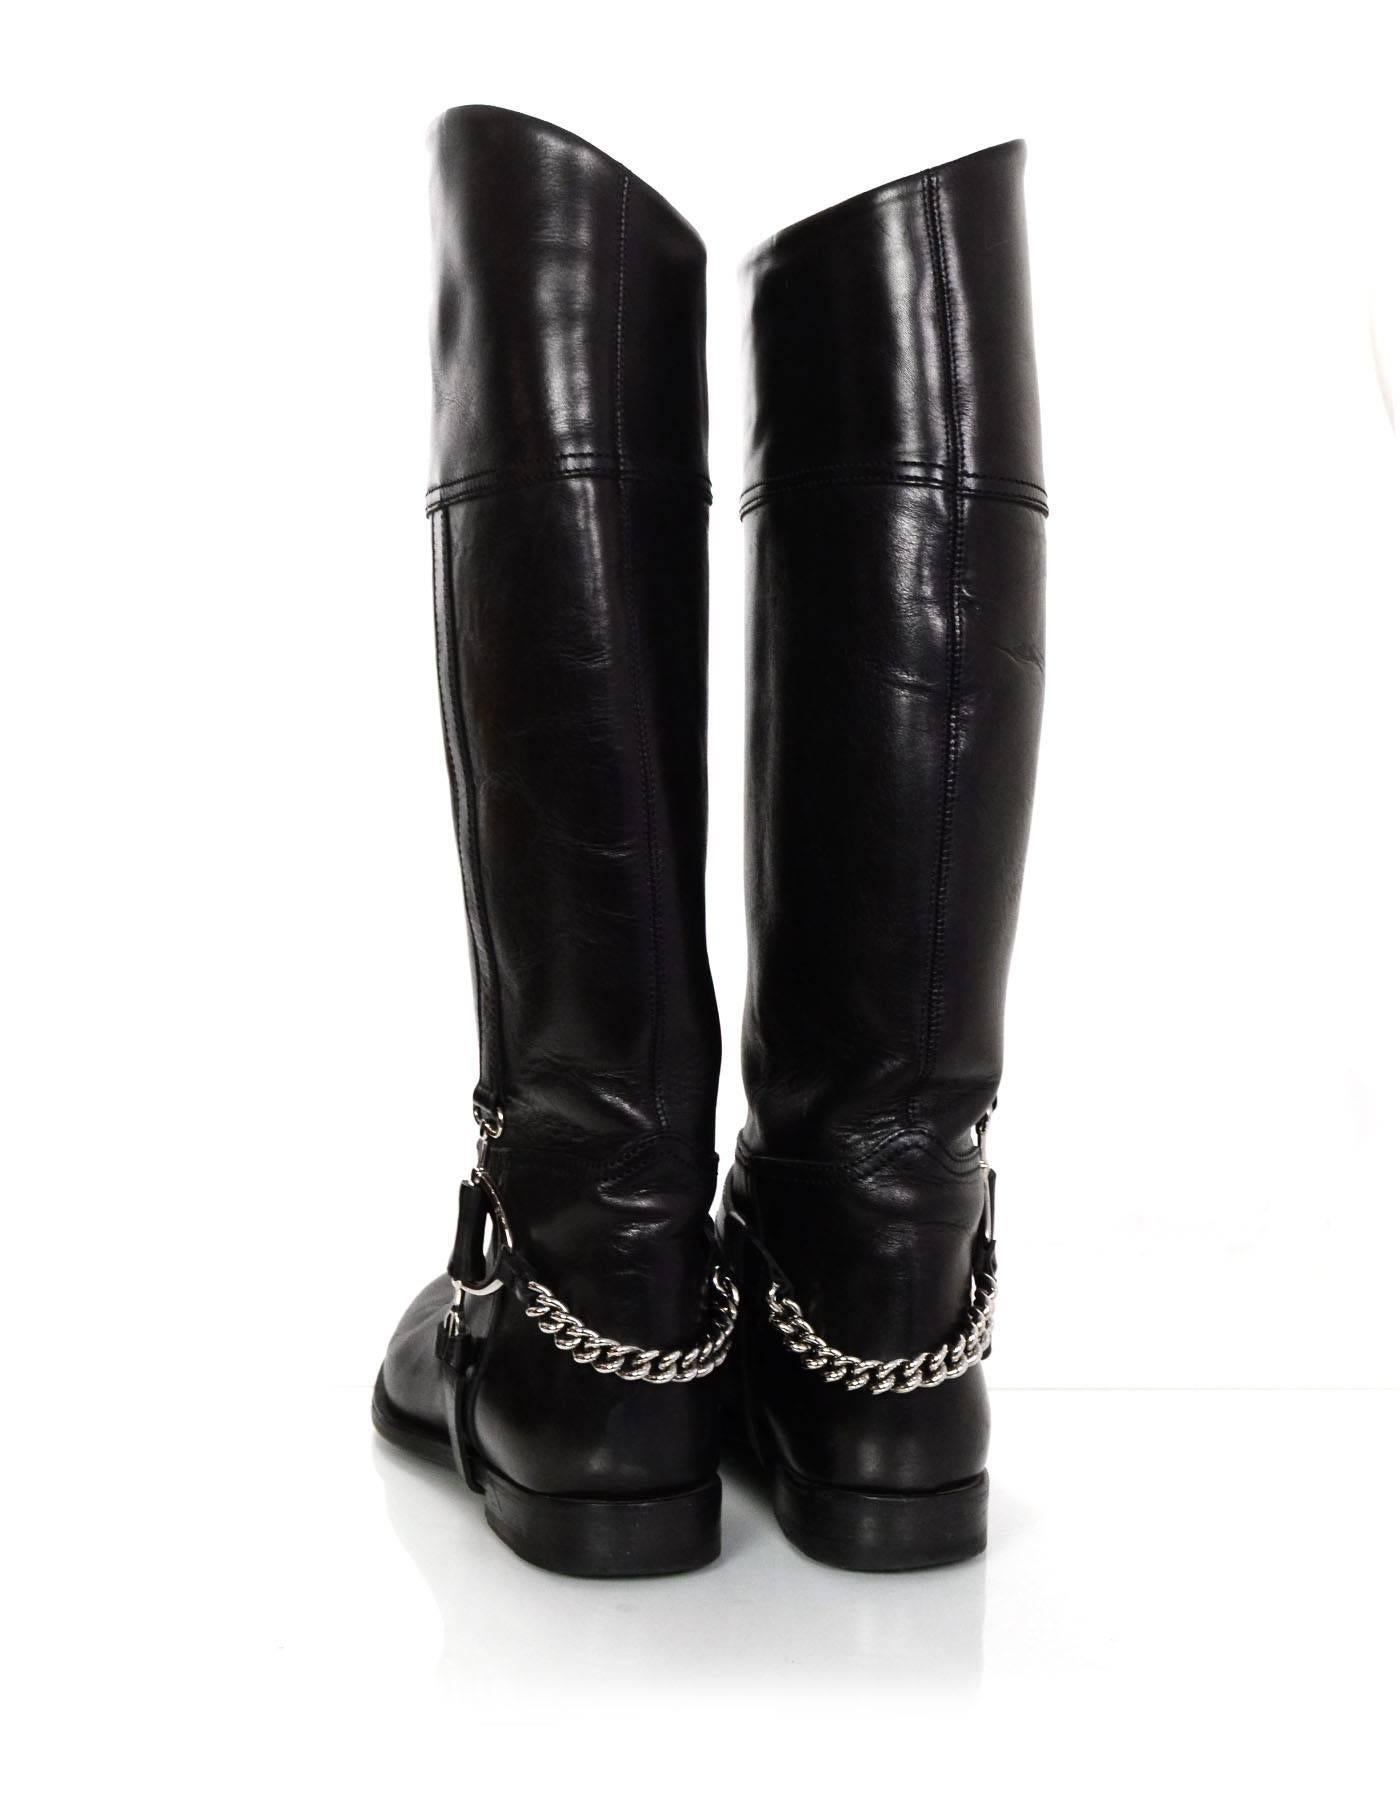 Ralph Lauren Black Leather Riding Boots Sz 6.5 In Good Condition In New York, NY